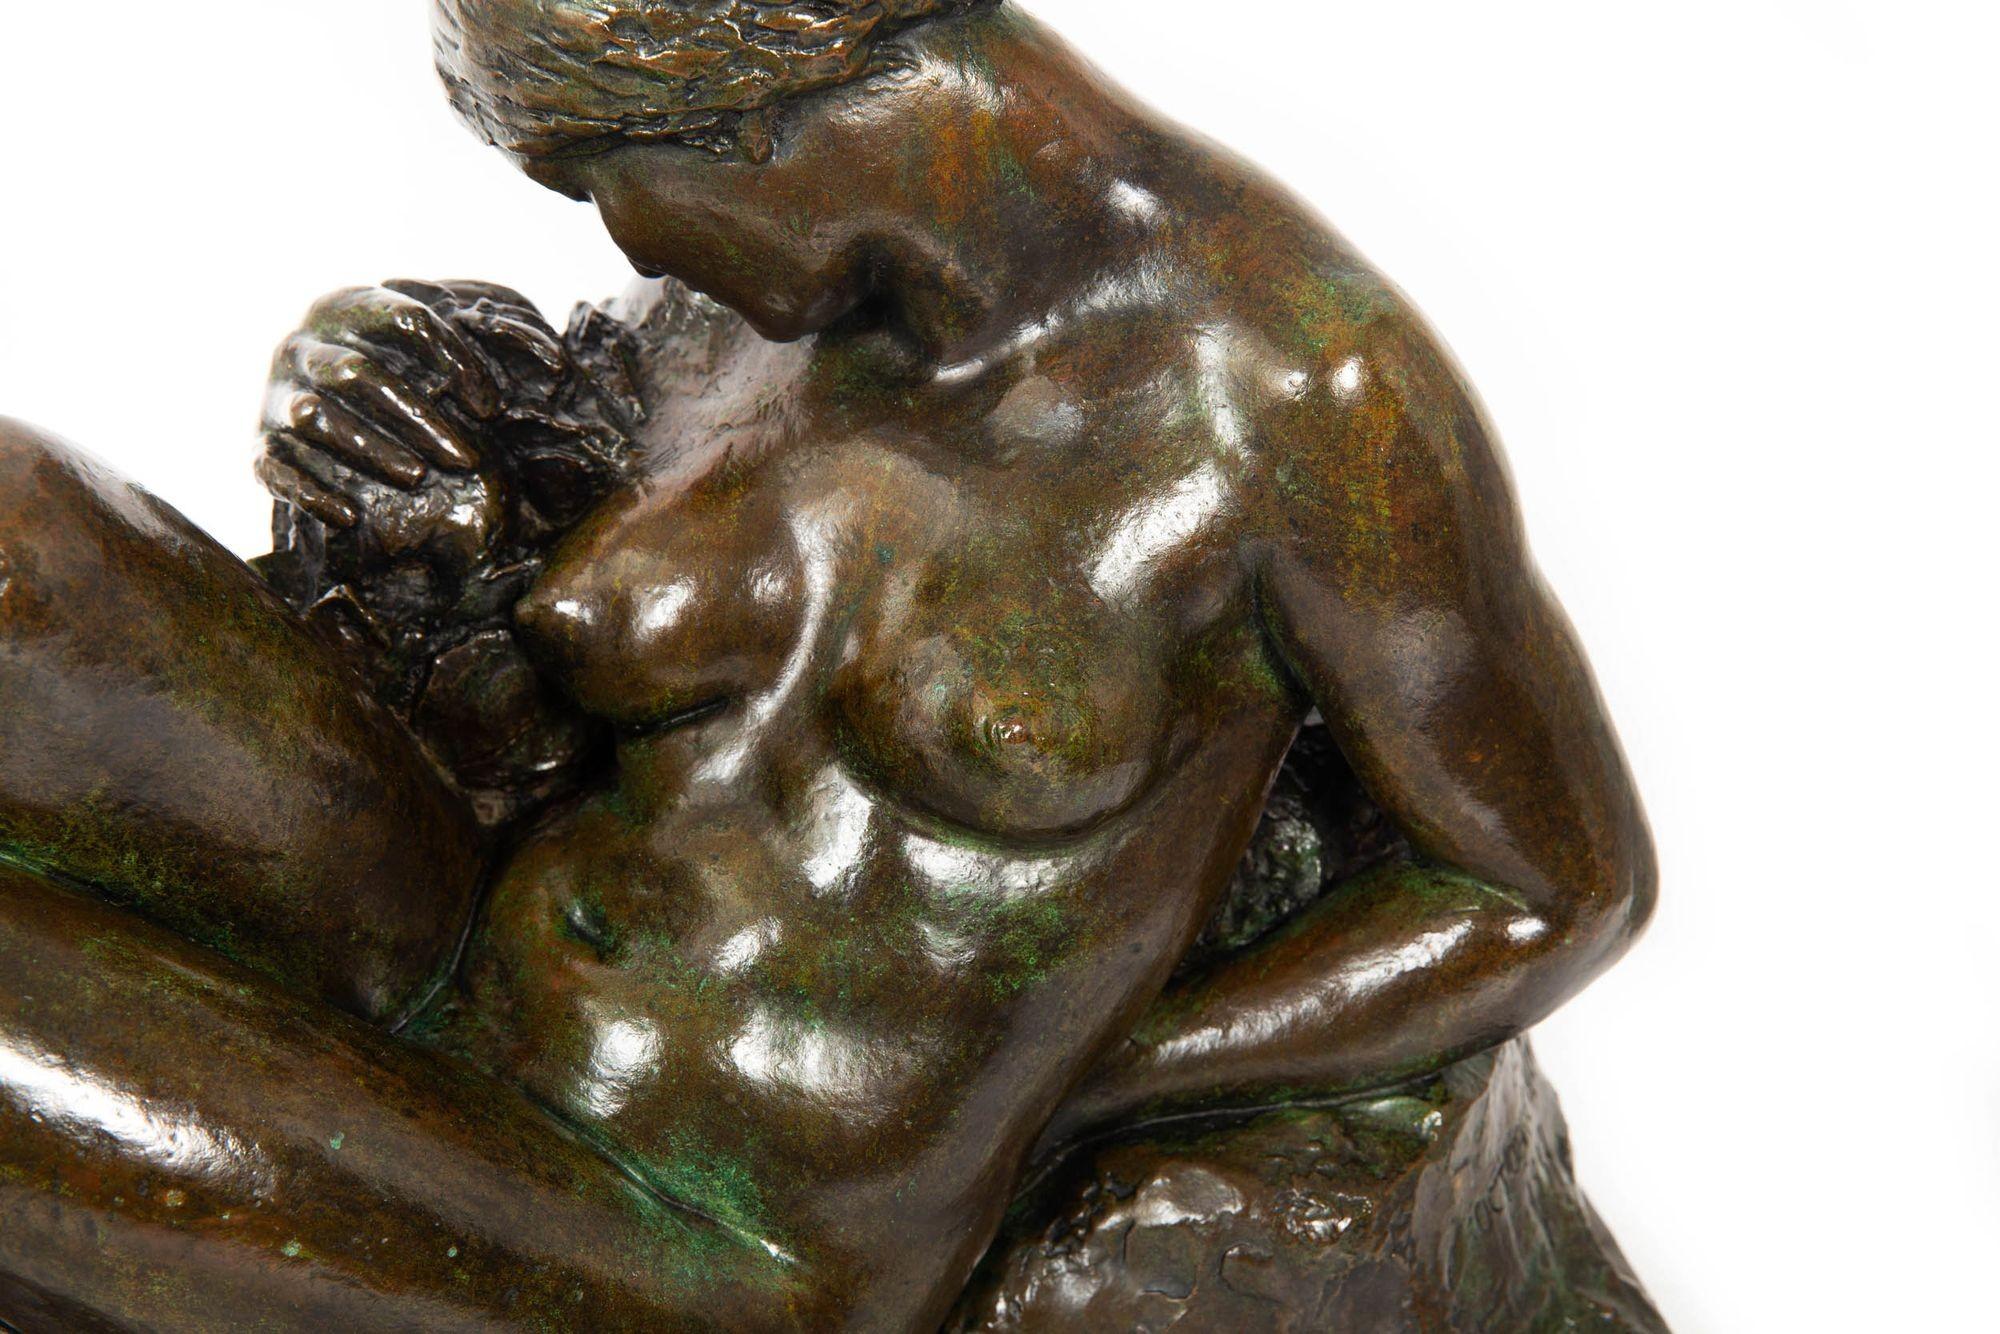 Rare French Modernist Bronze Sculpture of “Eve” (1937) by Aime Octobre For Sale 16